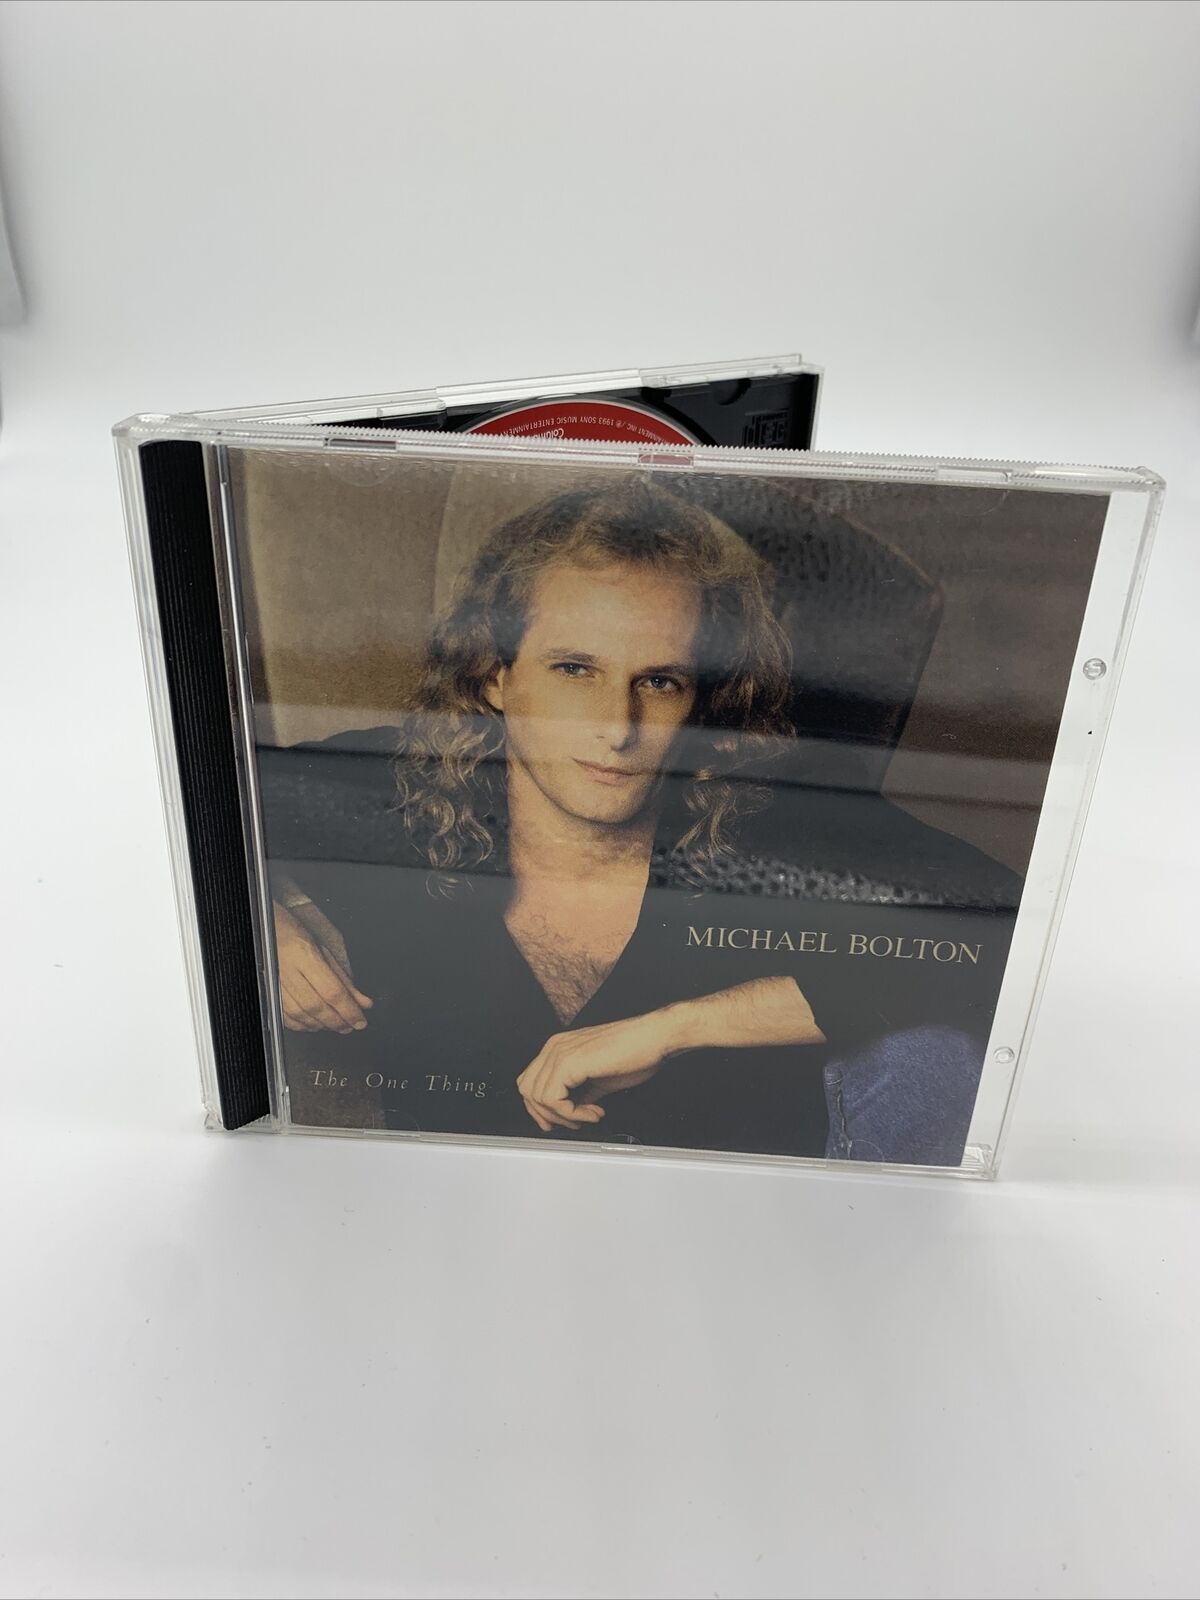 The One Thing by Michael Bolton (CD, Nov-1993, Columbia (USA))